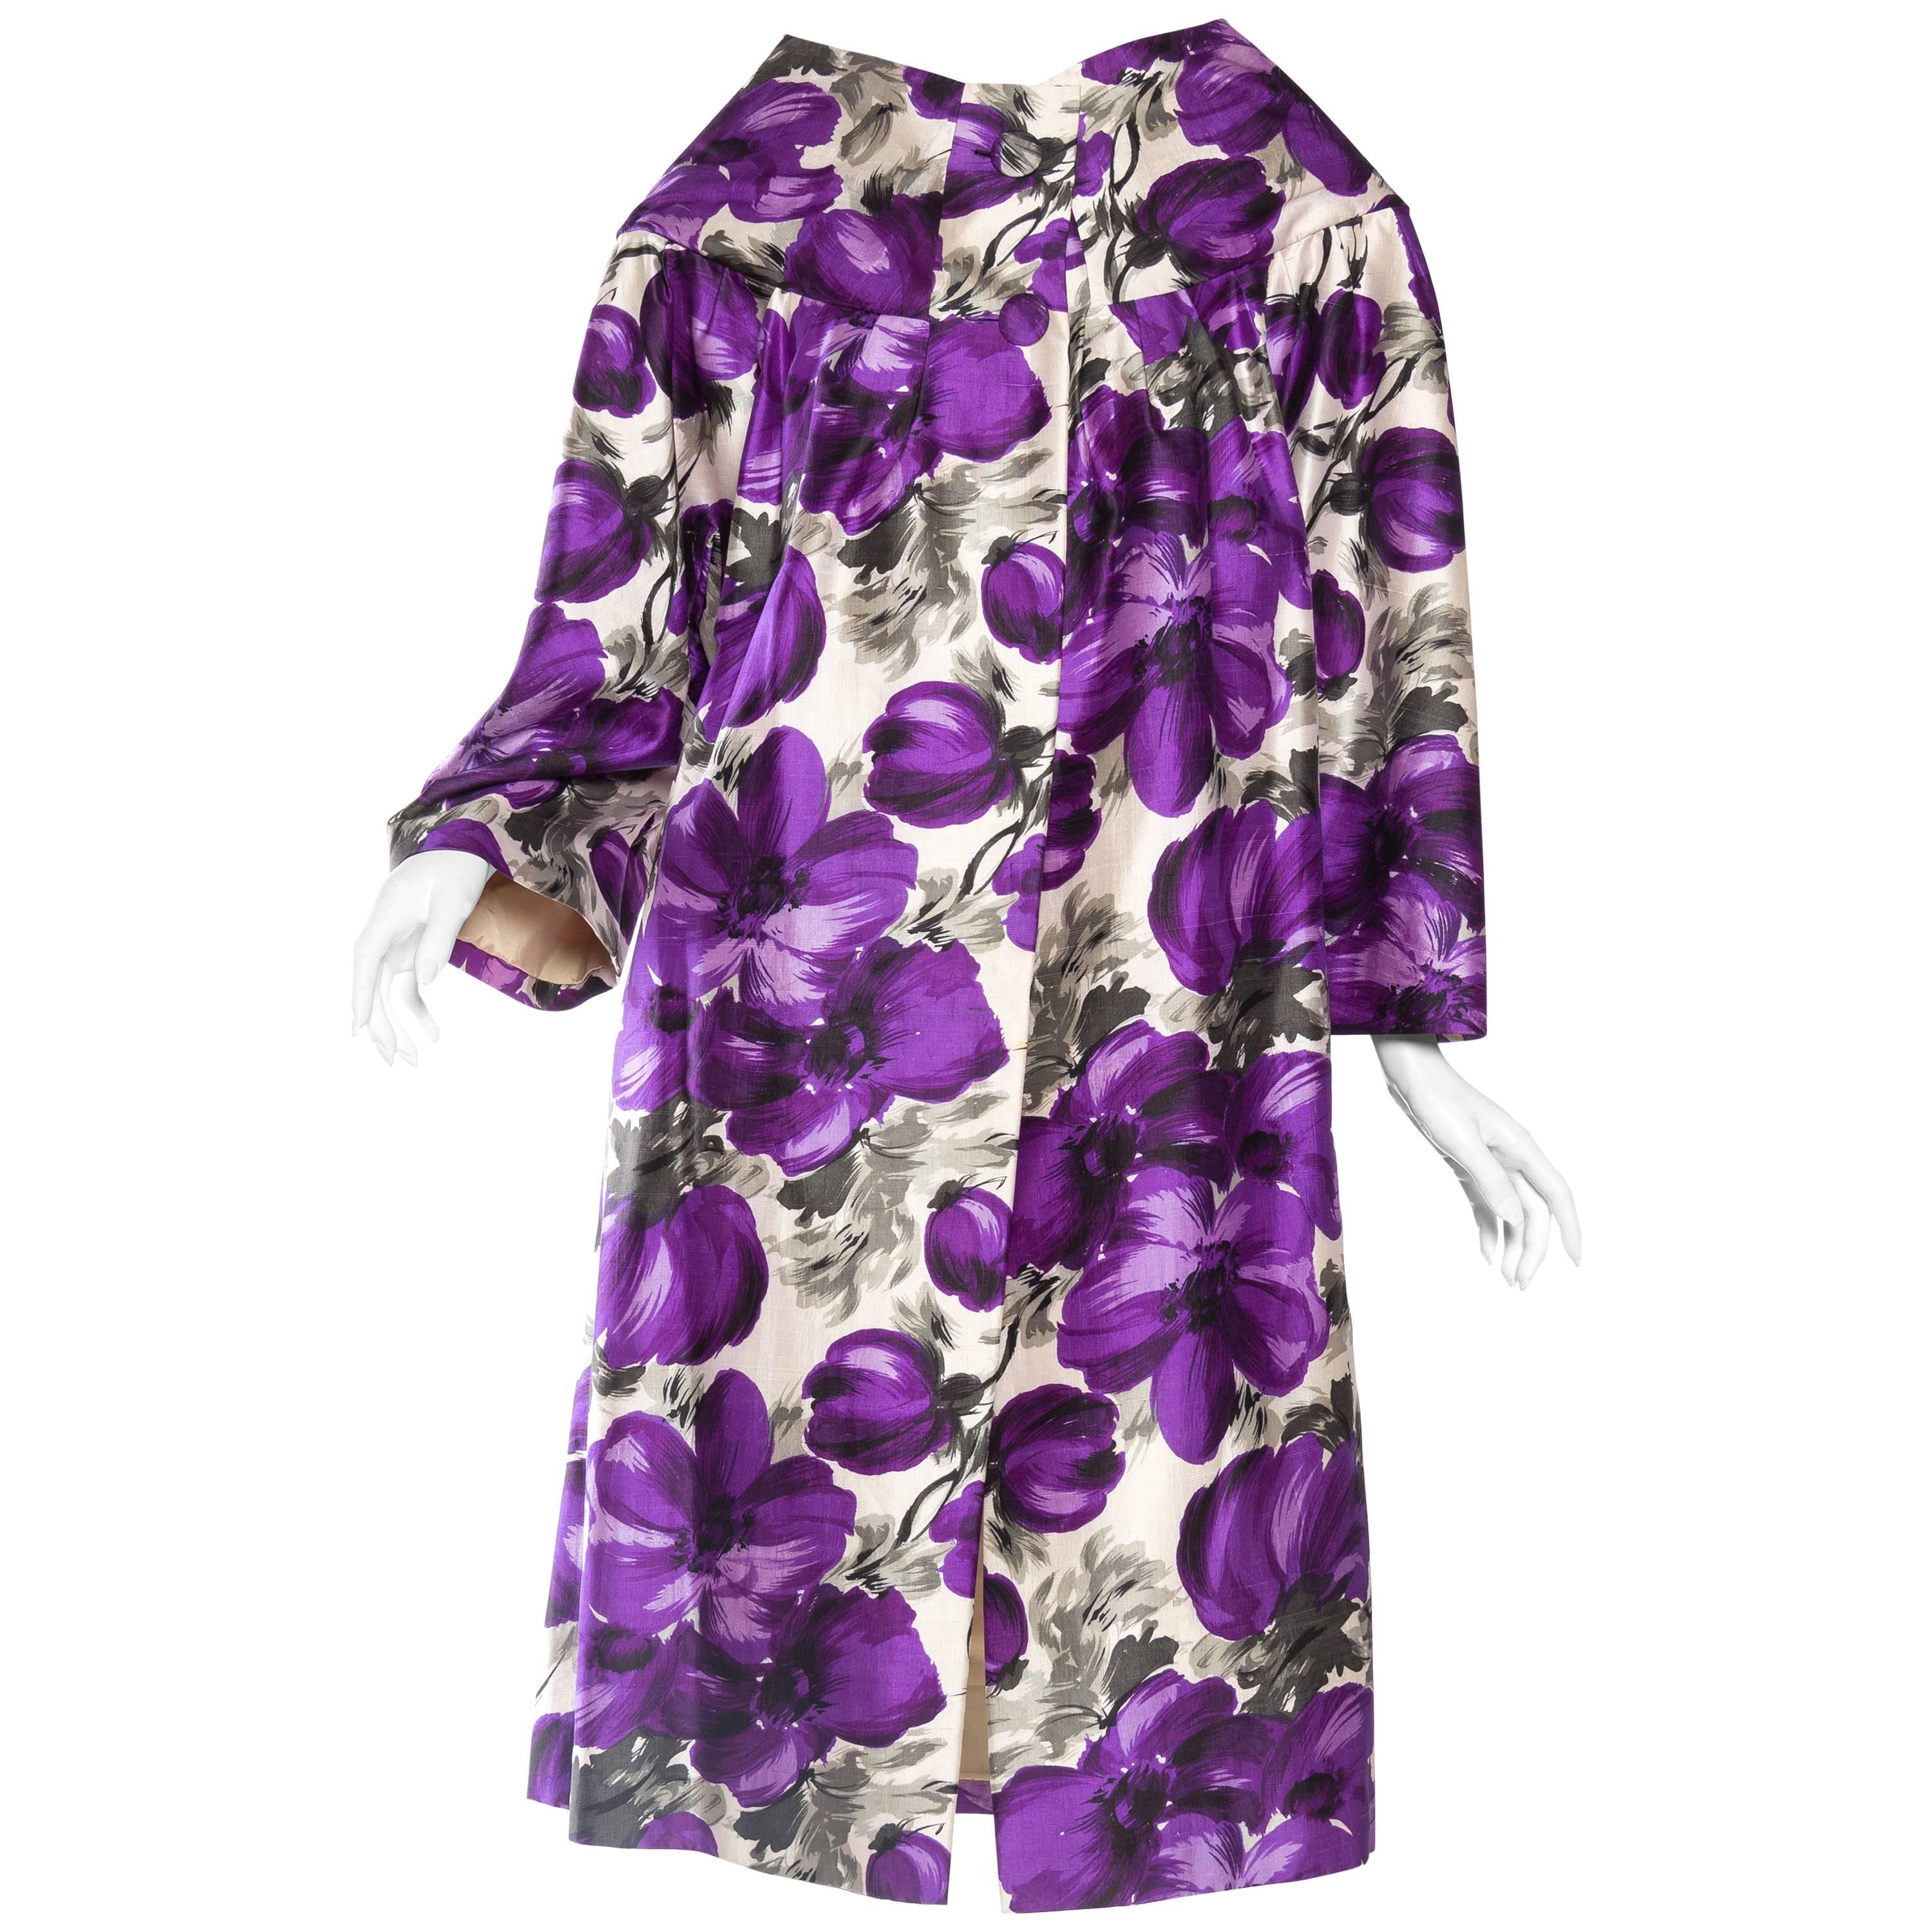 Gorgeous Floral Printed Silk Lightweight Coat from the 1950s